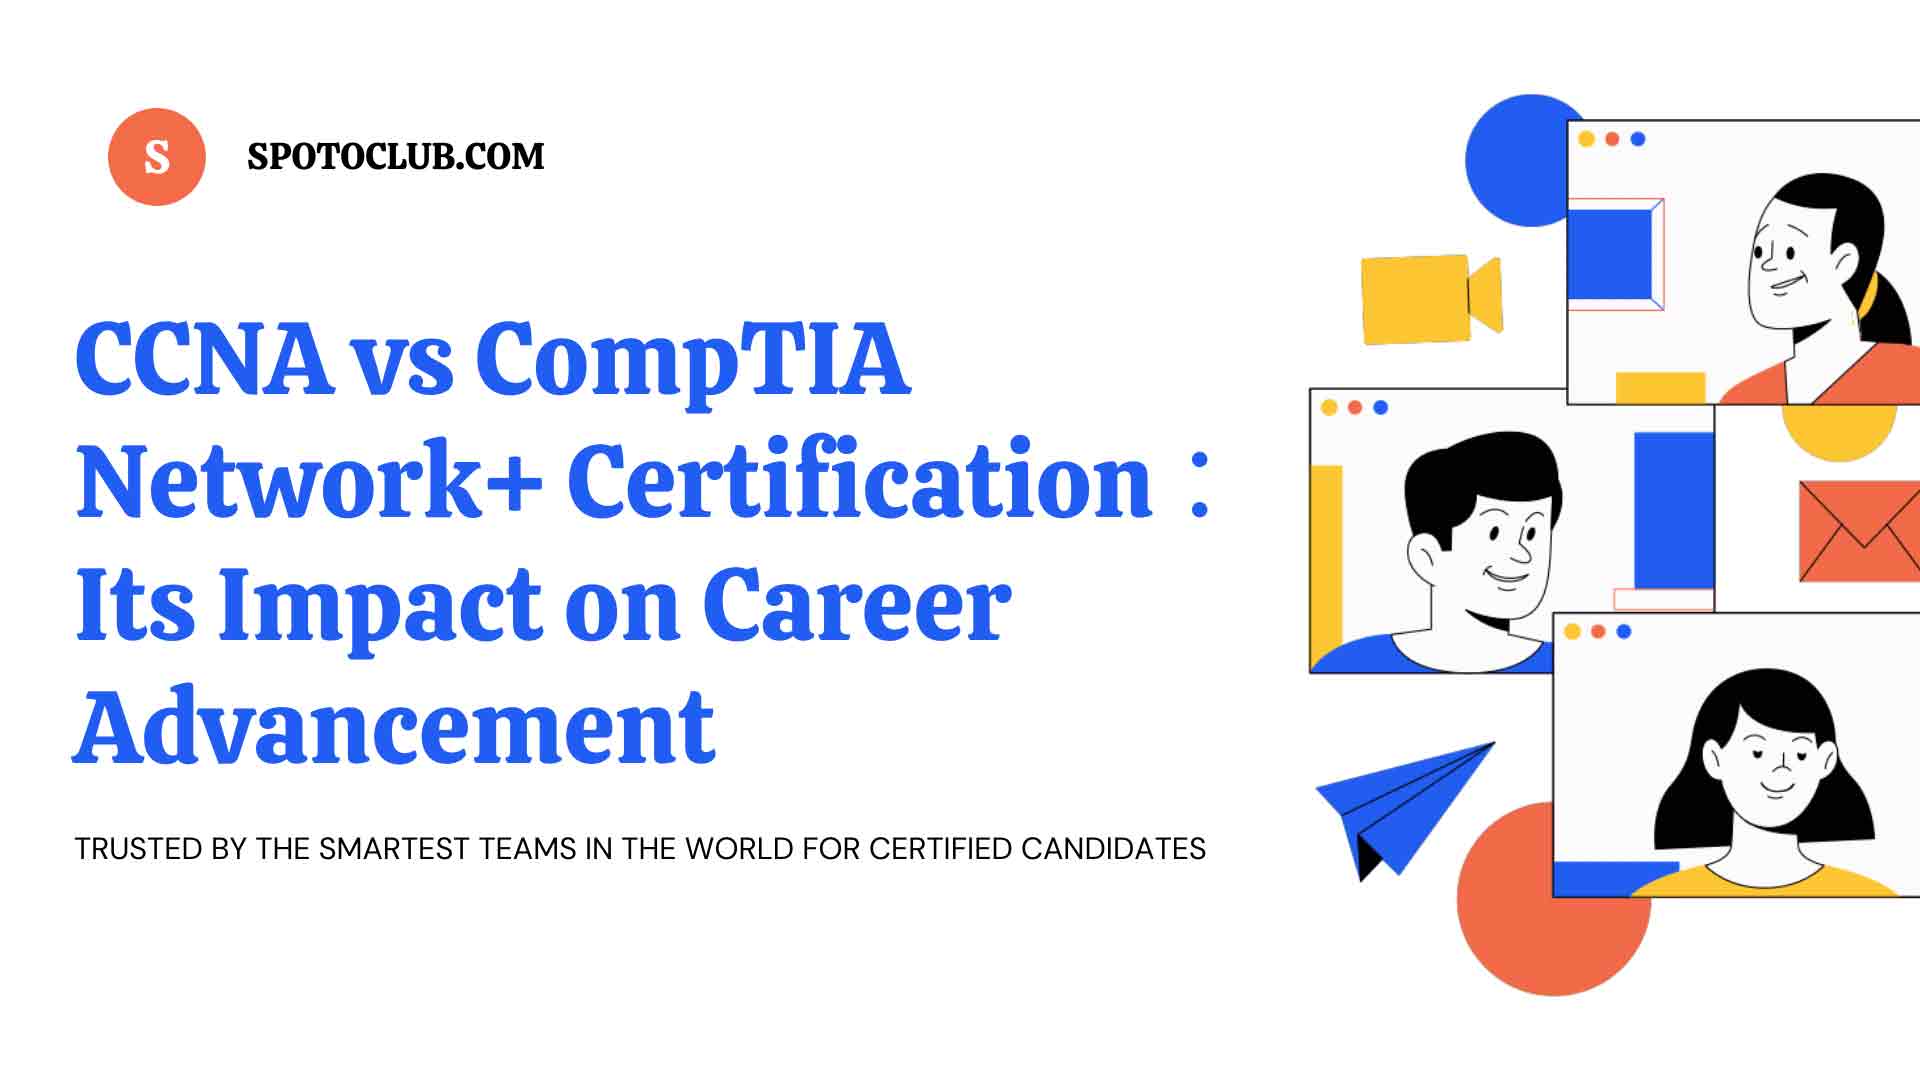 CCNA vs CompTIA Network+ Certification and Its Impact on Career Advancement